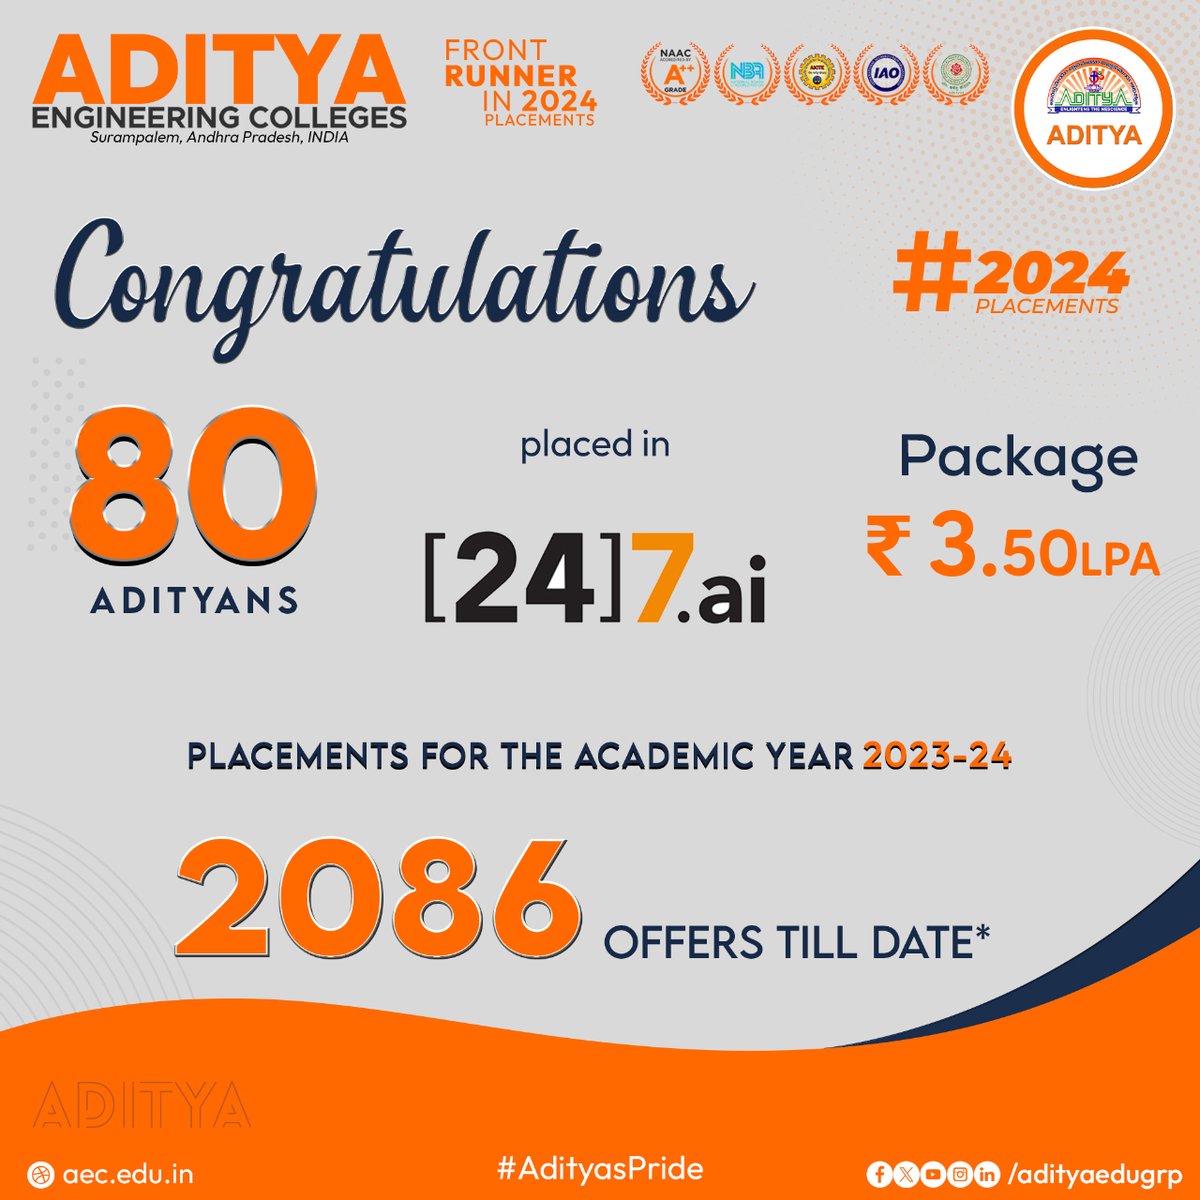 Congratulations to all 🌟80 Adityans for being placed in [24]7.AI with a Package of 3.50LPA.
#Aditya #247AI #2024Placements #3LPA #AdityasPride #AchieveWithAditya #RisingToNewHorizon